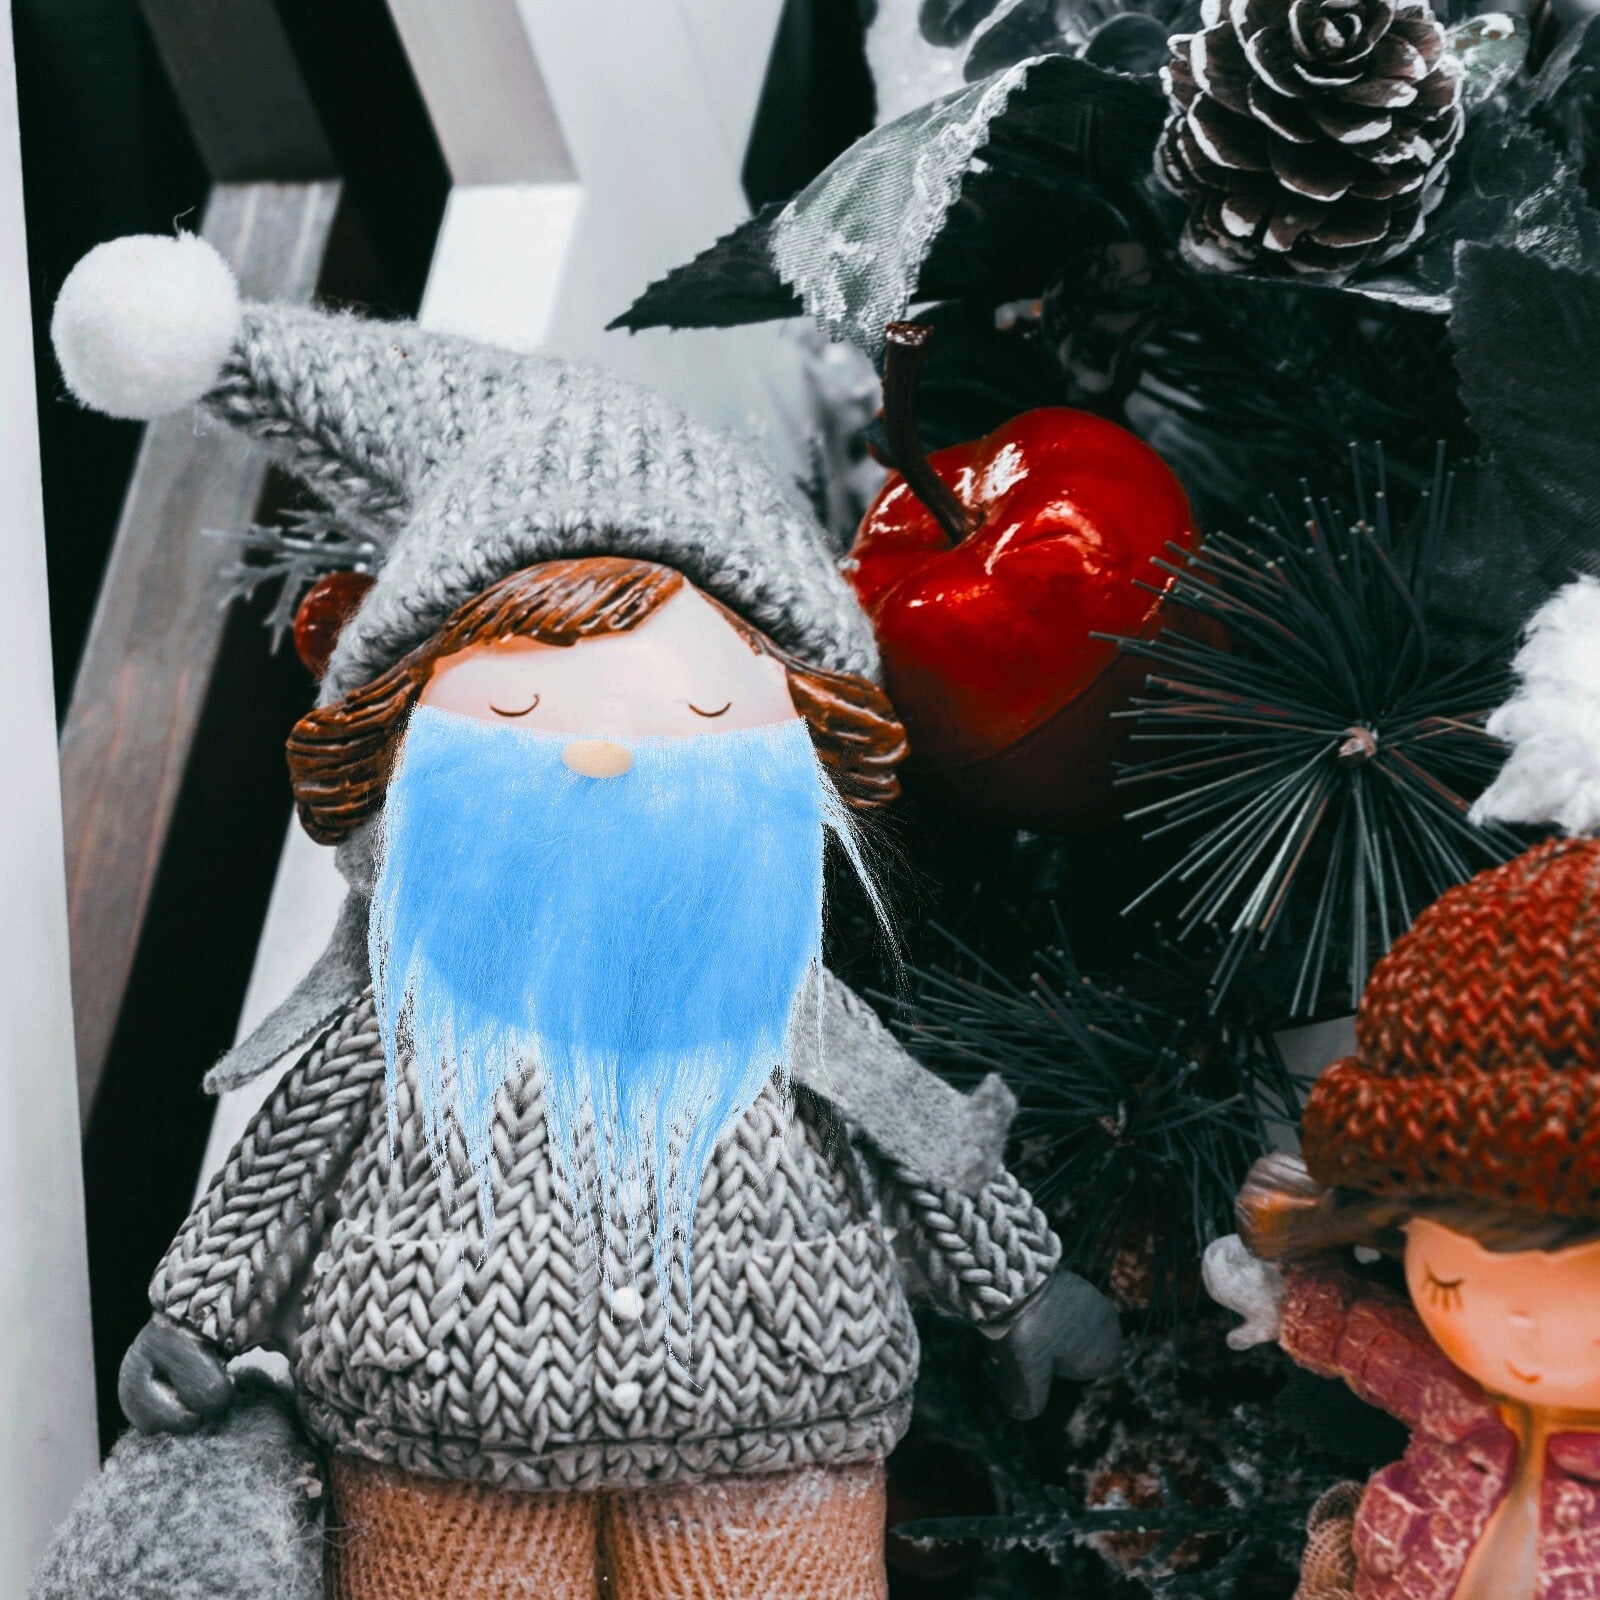 Faux Fur Crafts Supplies, Christmas Gnomes Beards